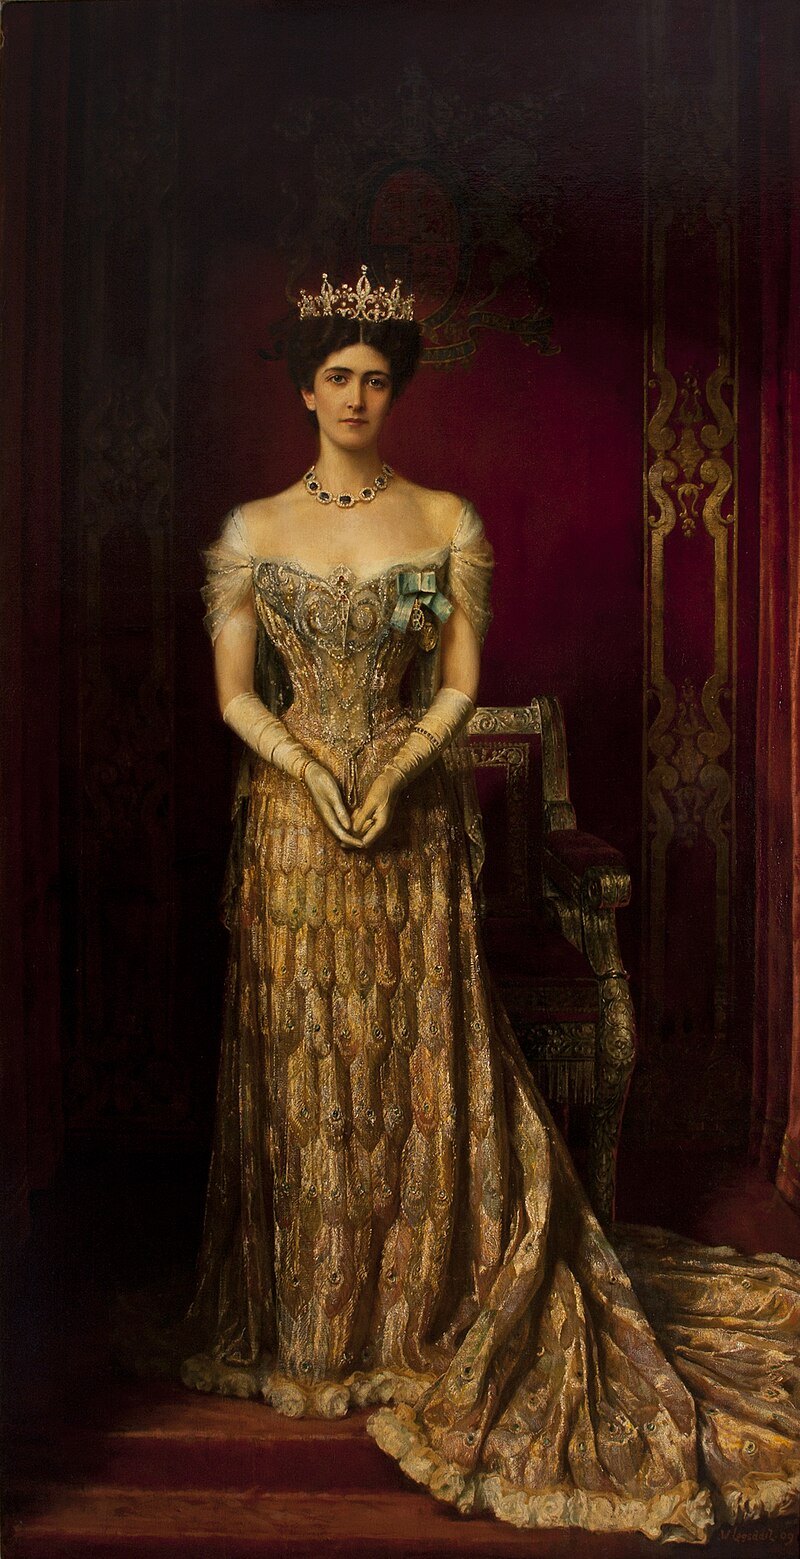 Peacock dress of Lady Curzon - Wikipedia